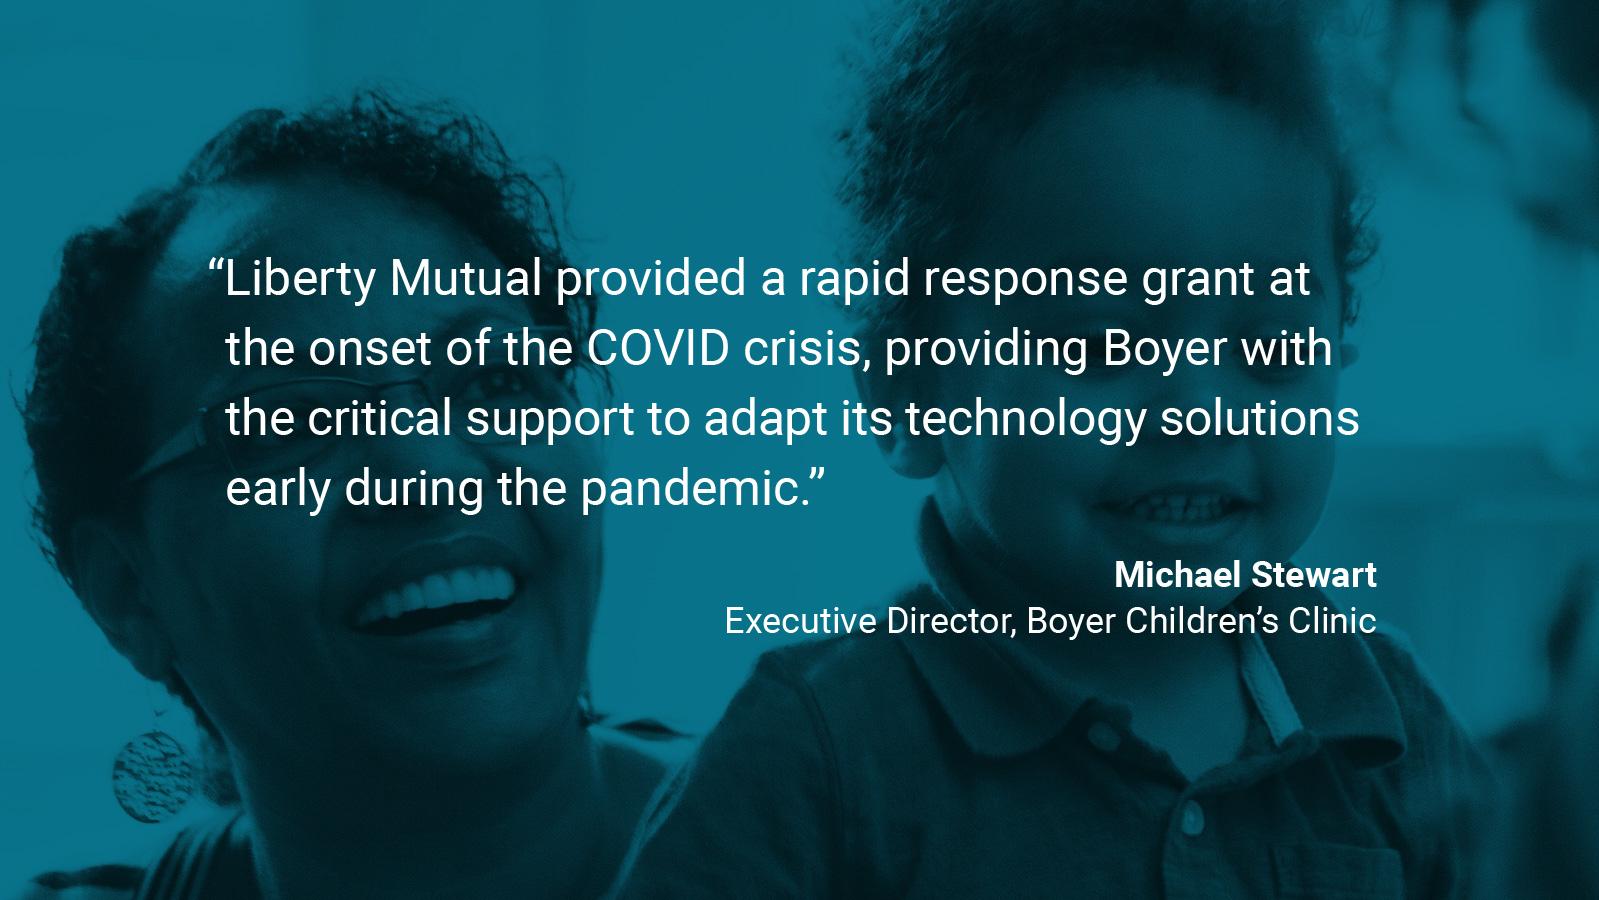 (slide 2 of 4) Quote by: Michael Stewart, Executive Director of Boyer Children's Clinic:  “Liberty Mutual provided a rapid response grant at the onset of the pandemic, providing Boyer with the critical support to adapt its technology solutions early during the pandemic.”. 